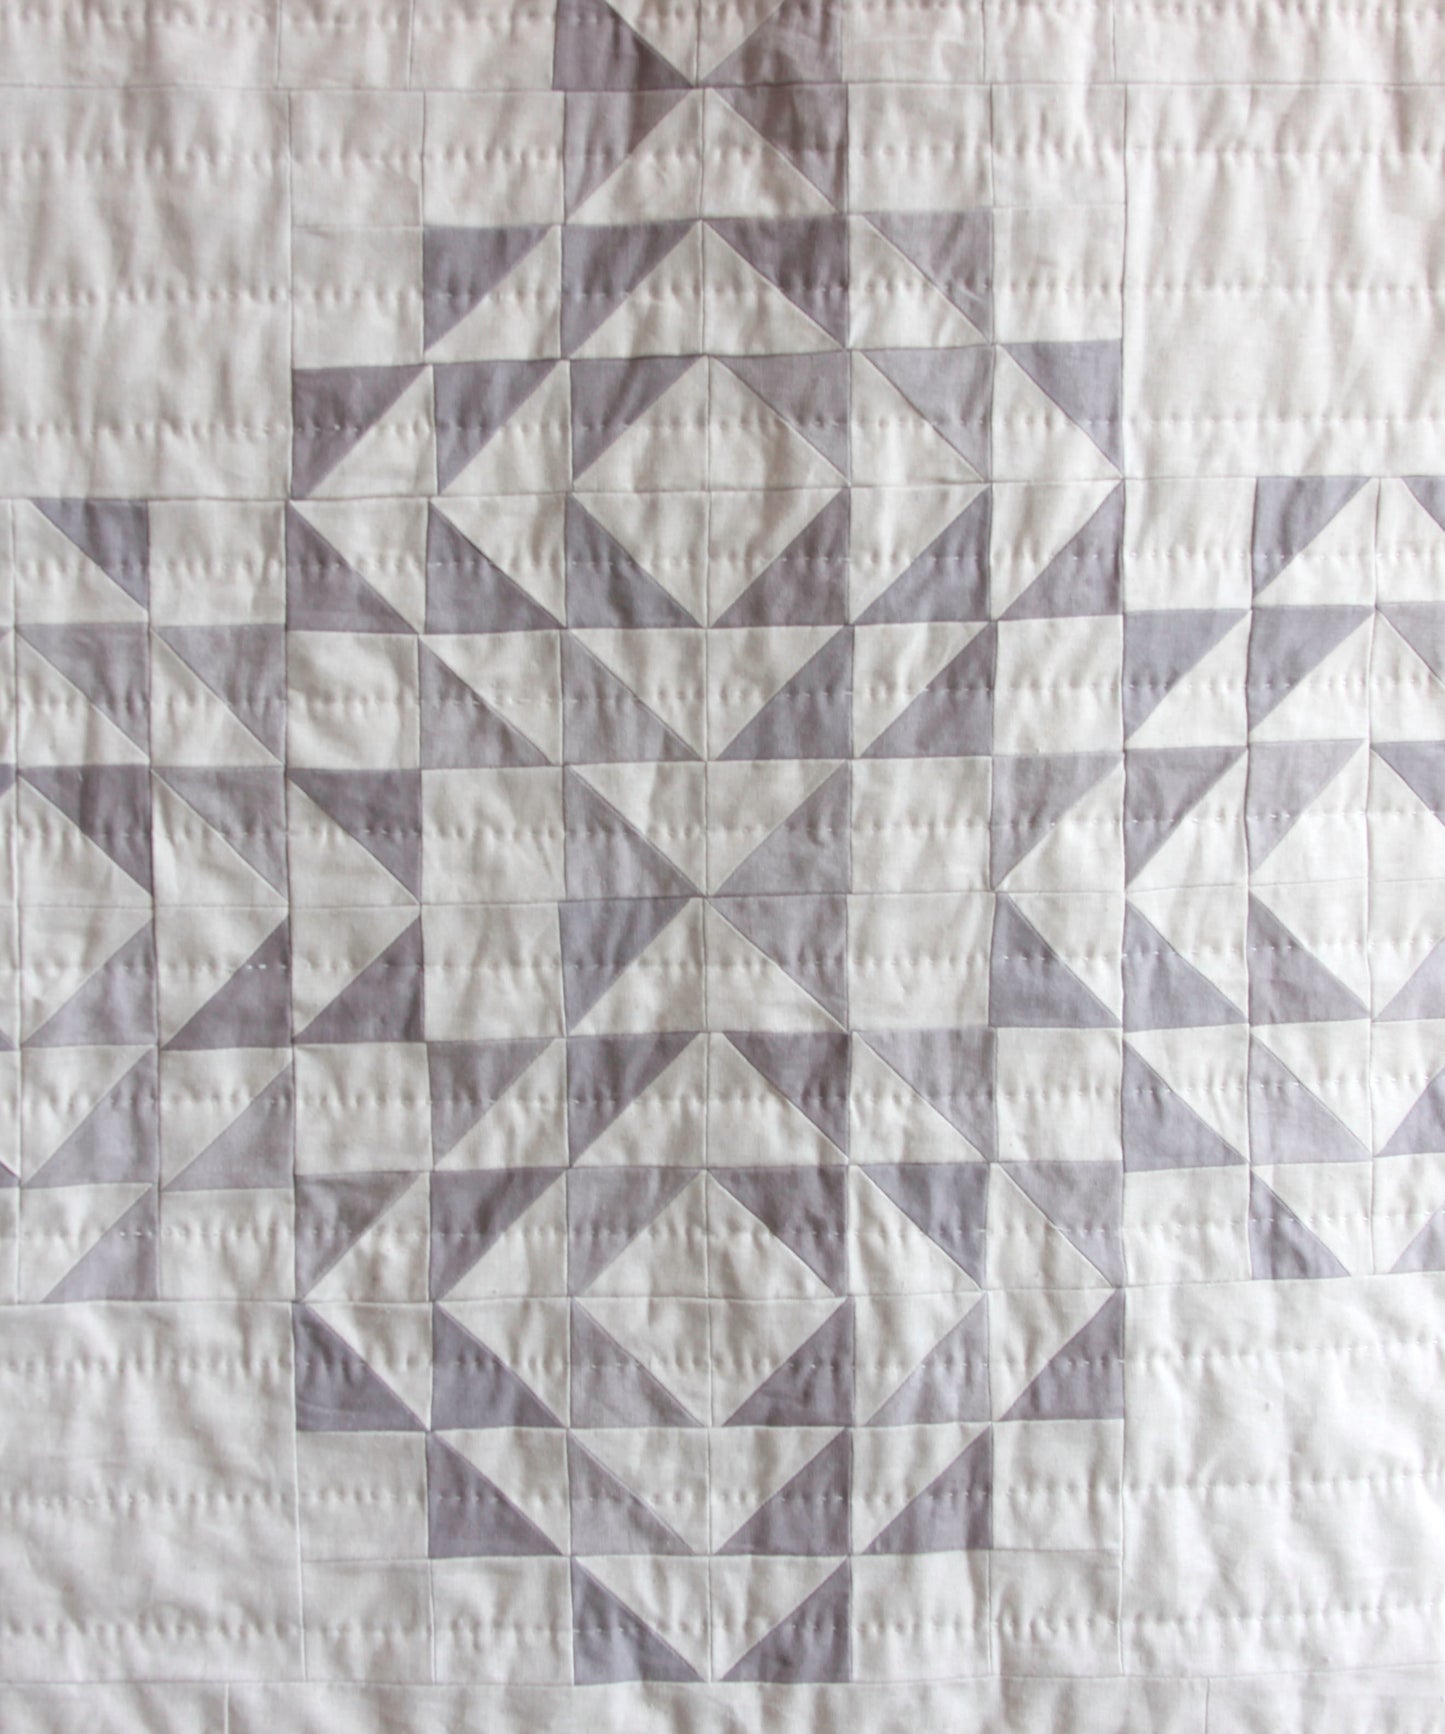 Lilacs Quilt 1 (Currently on view at VERSE Work/Shop)